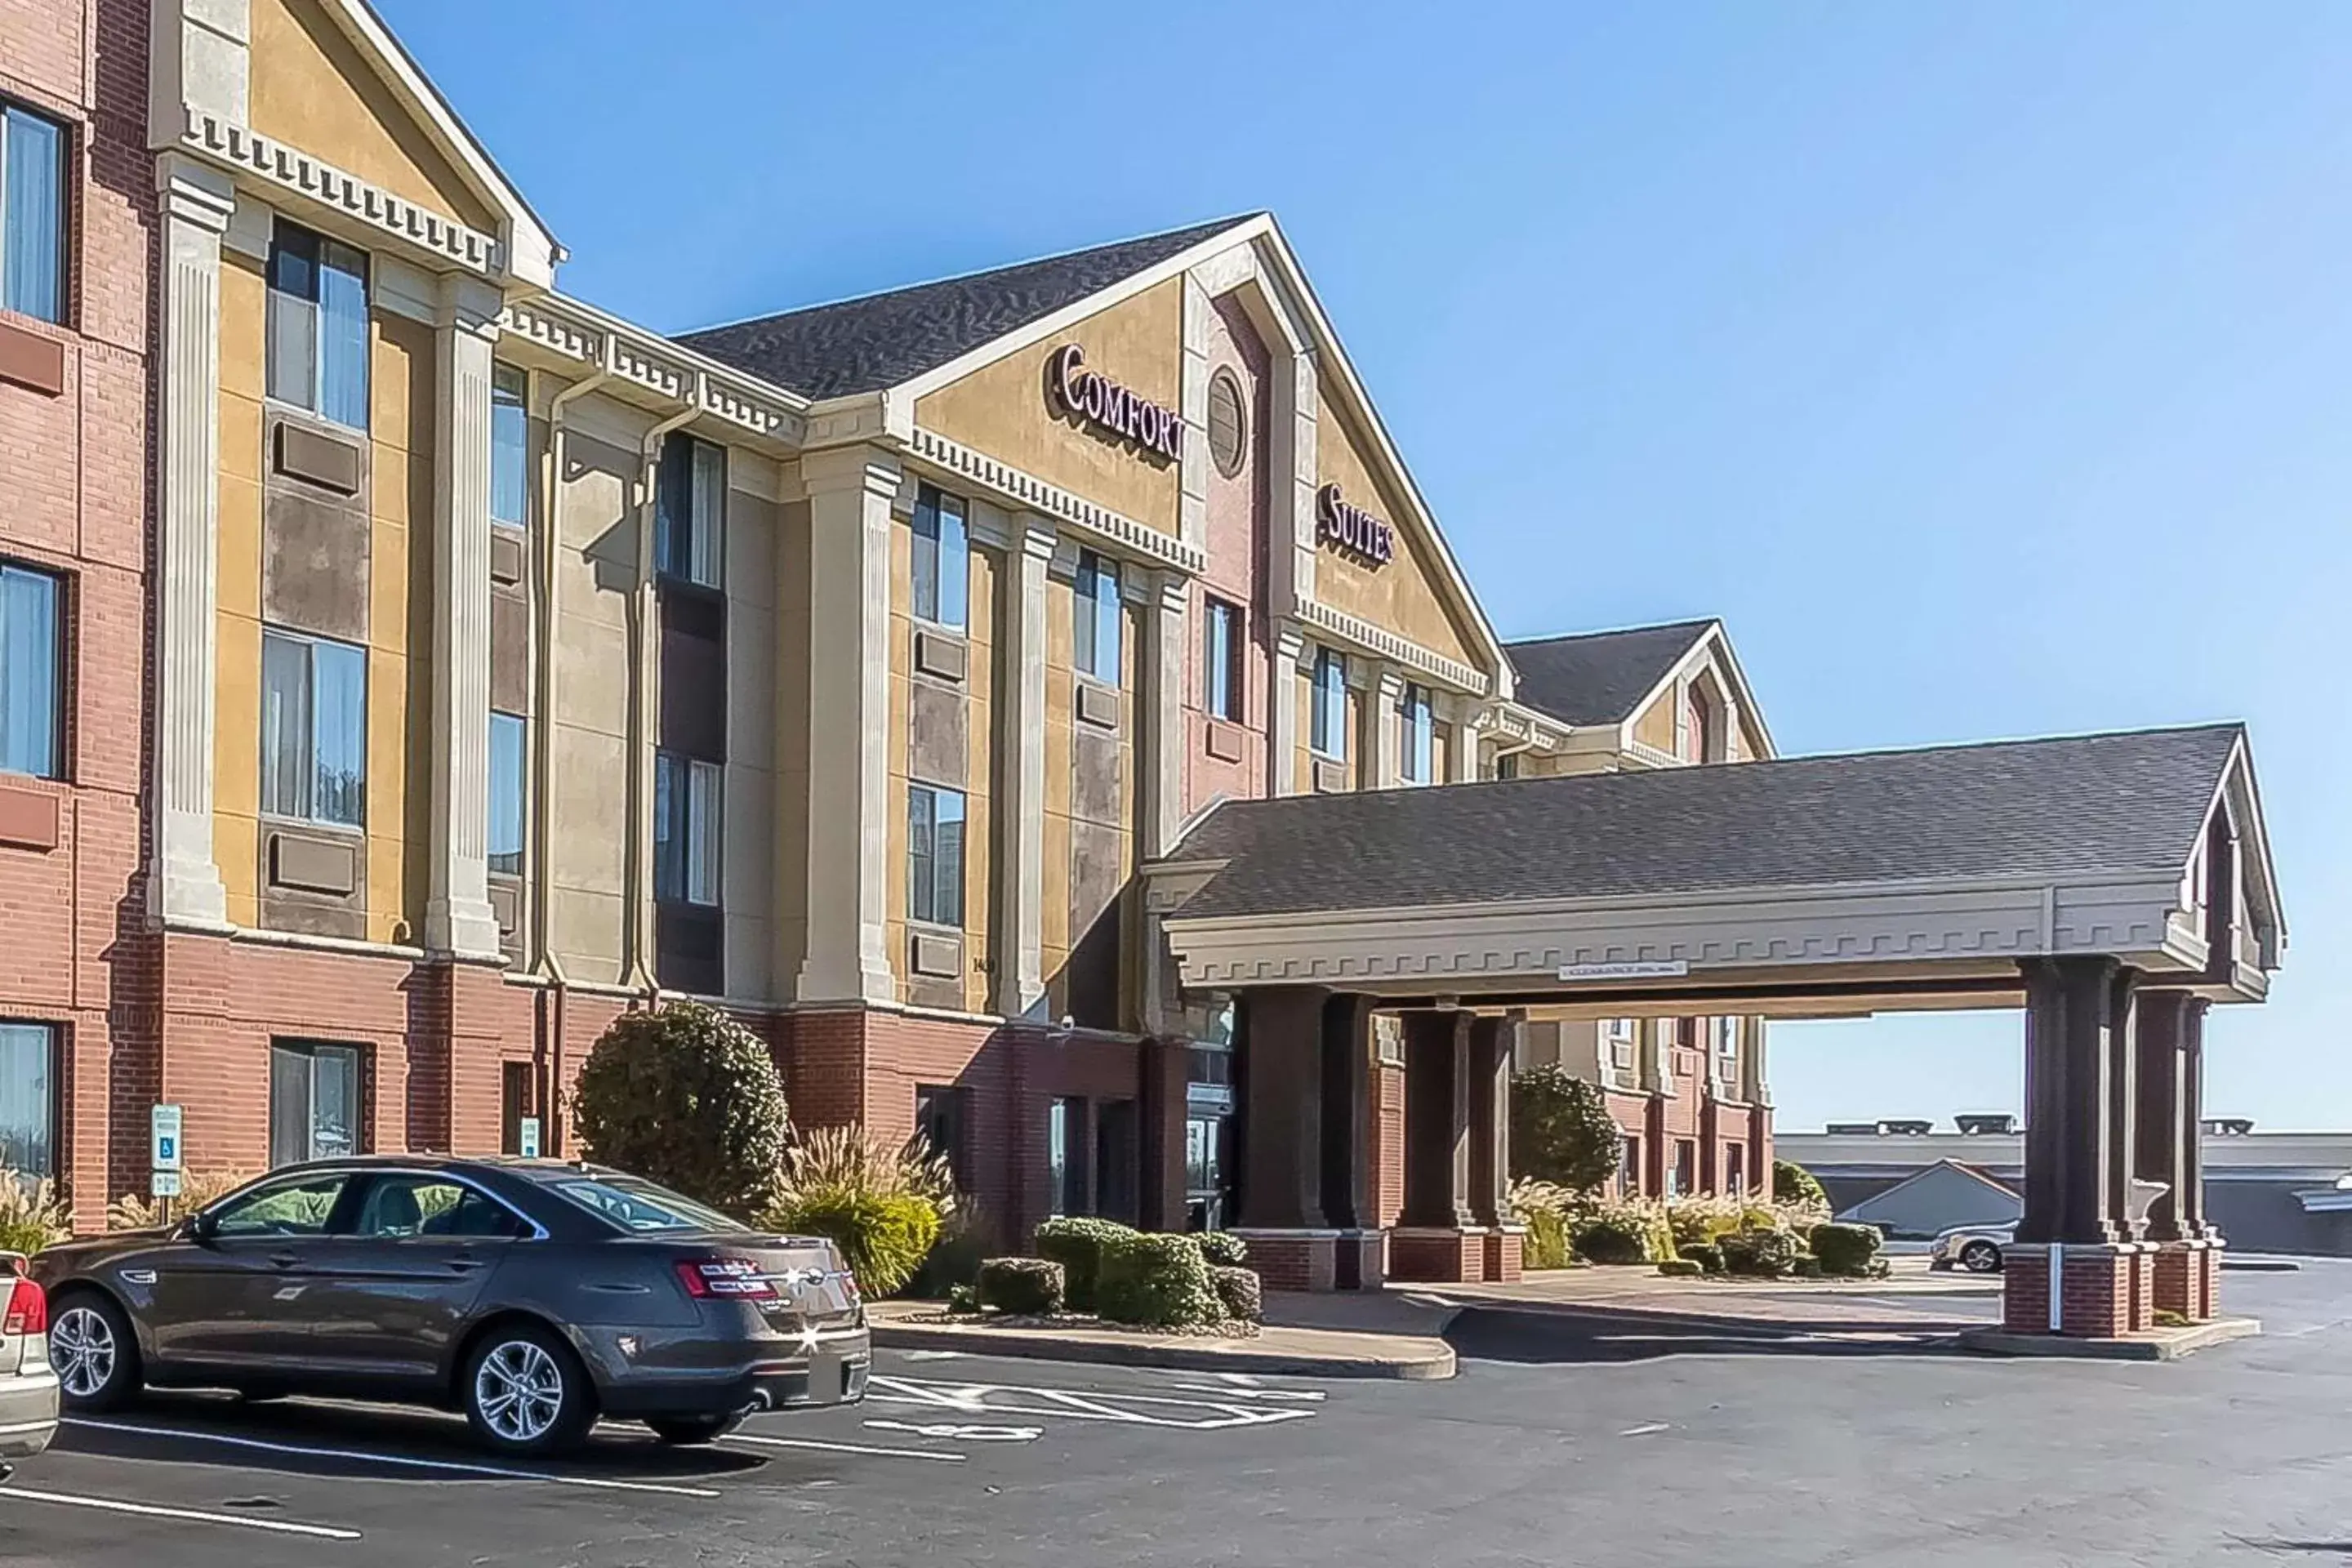 Property building in Comfort Suites St Charles-St Louis